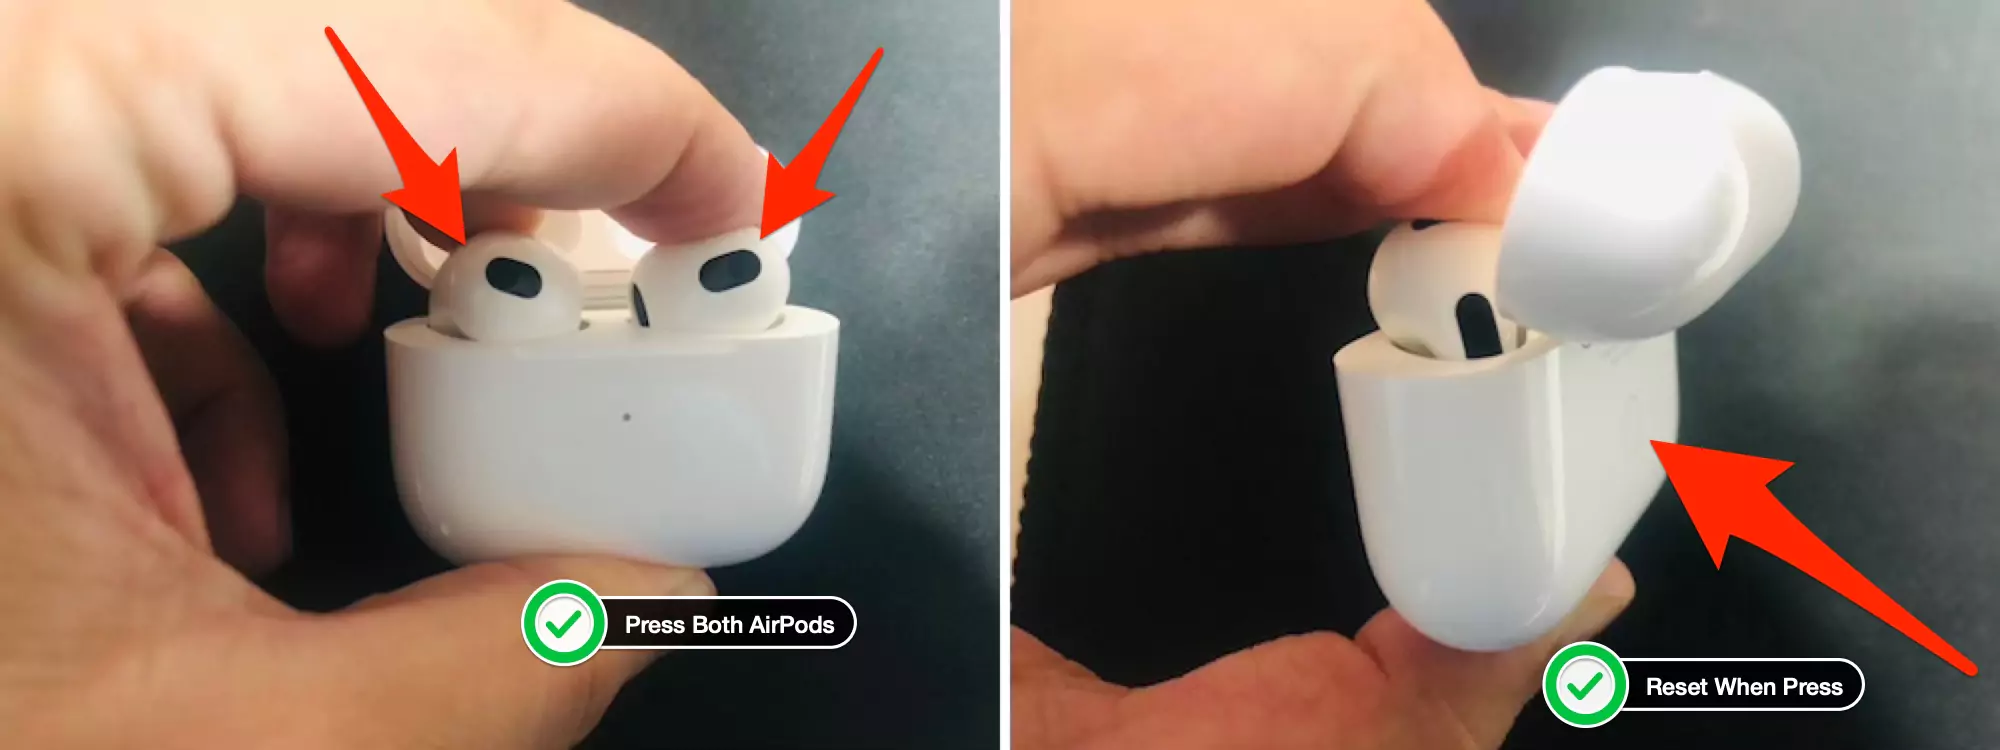 press-both-the-airpods-and-reset-using-back-button-of-the-charging-case